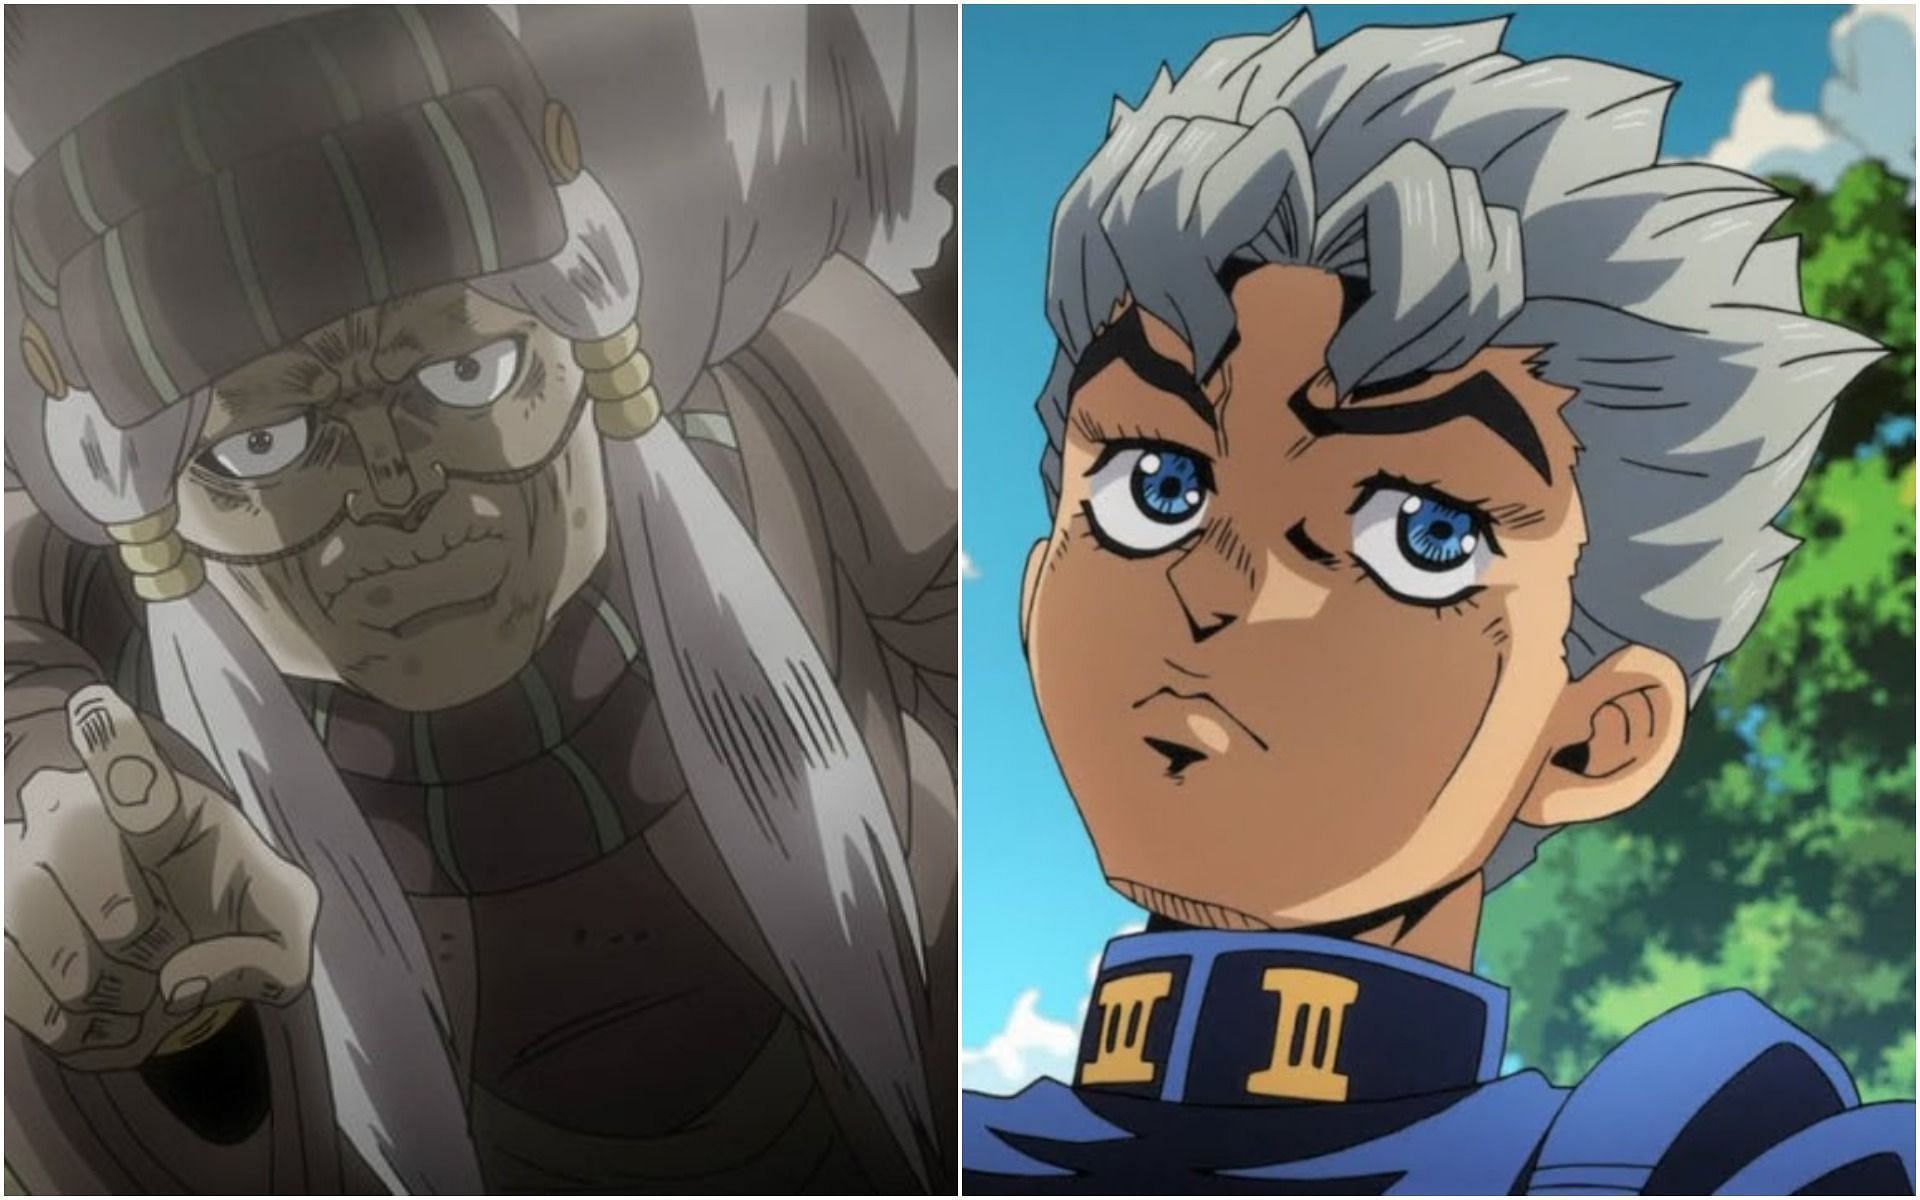 JoJo's Bizarre Adventures: 6 characters who look weak but have unexpectedly  strong Stands